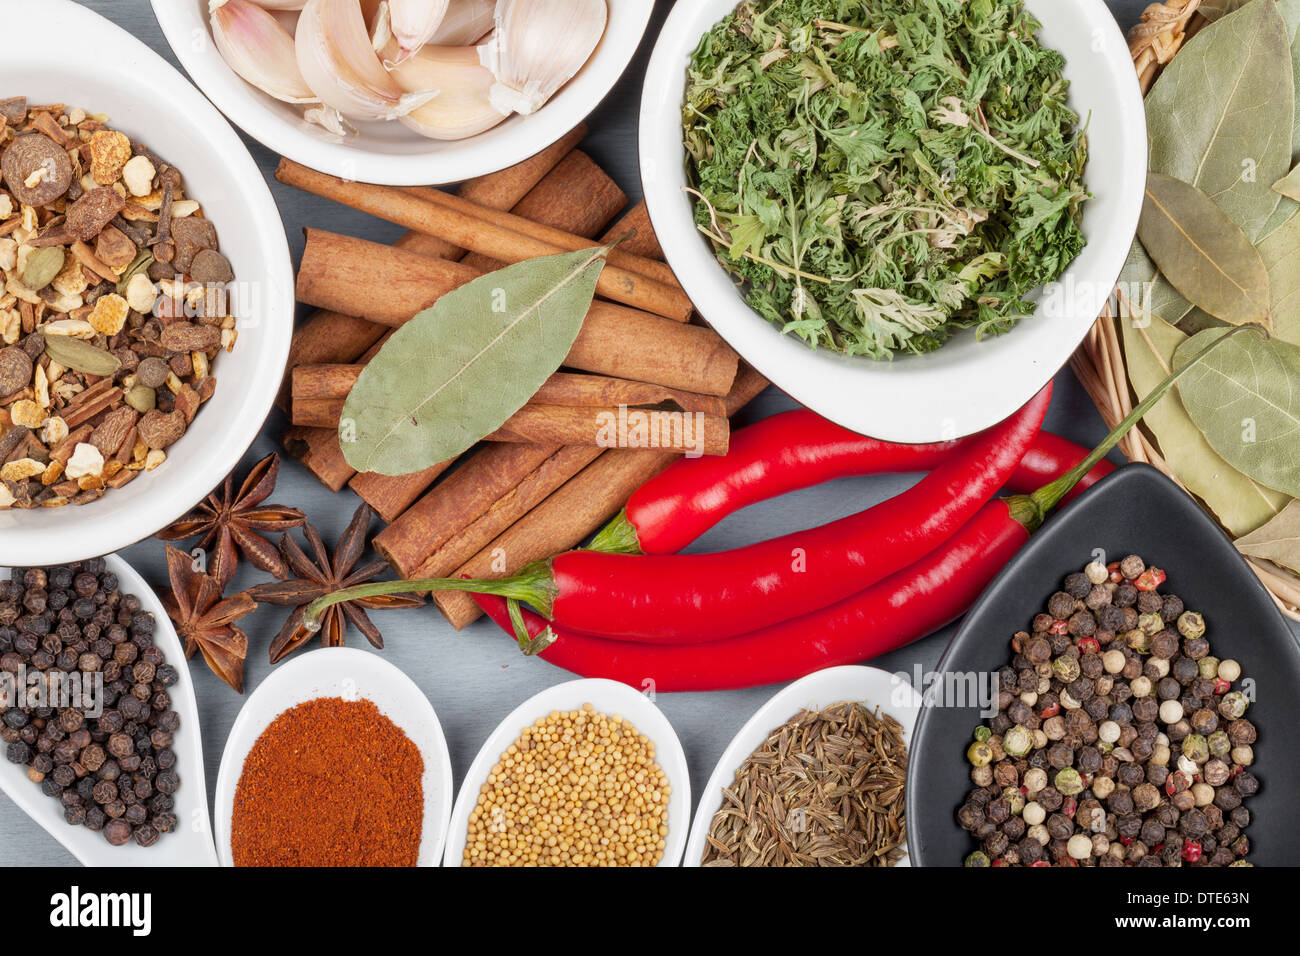 Herbs and spices on wood table background Stock Photo